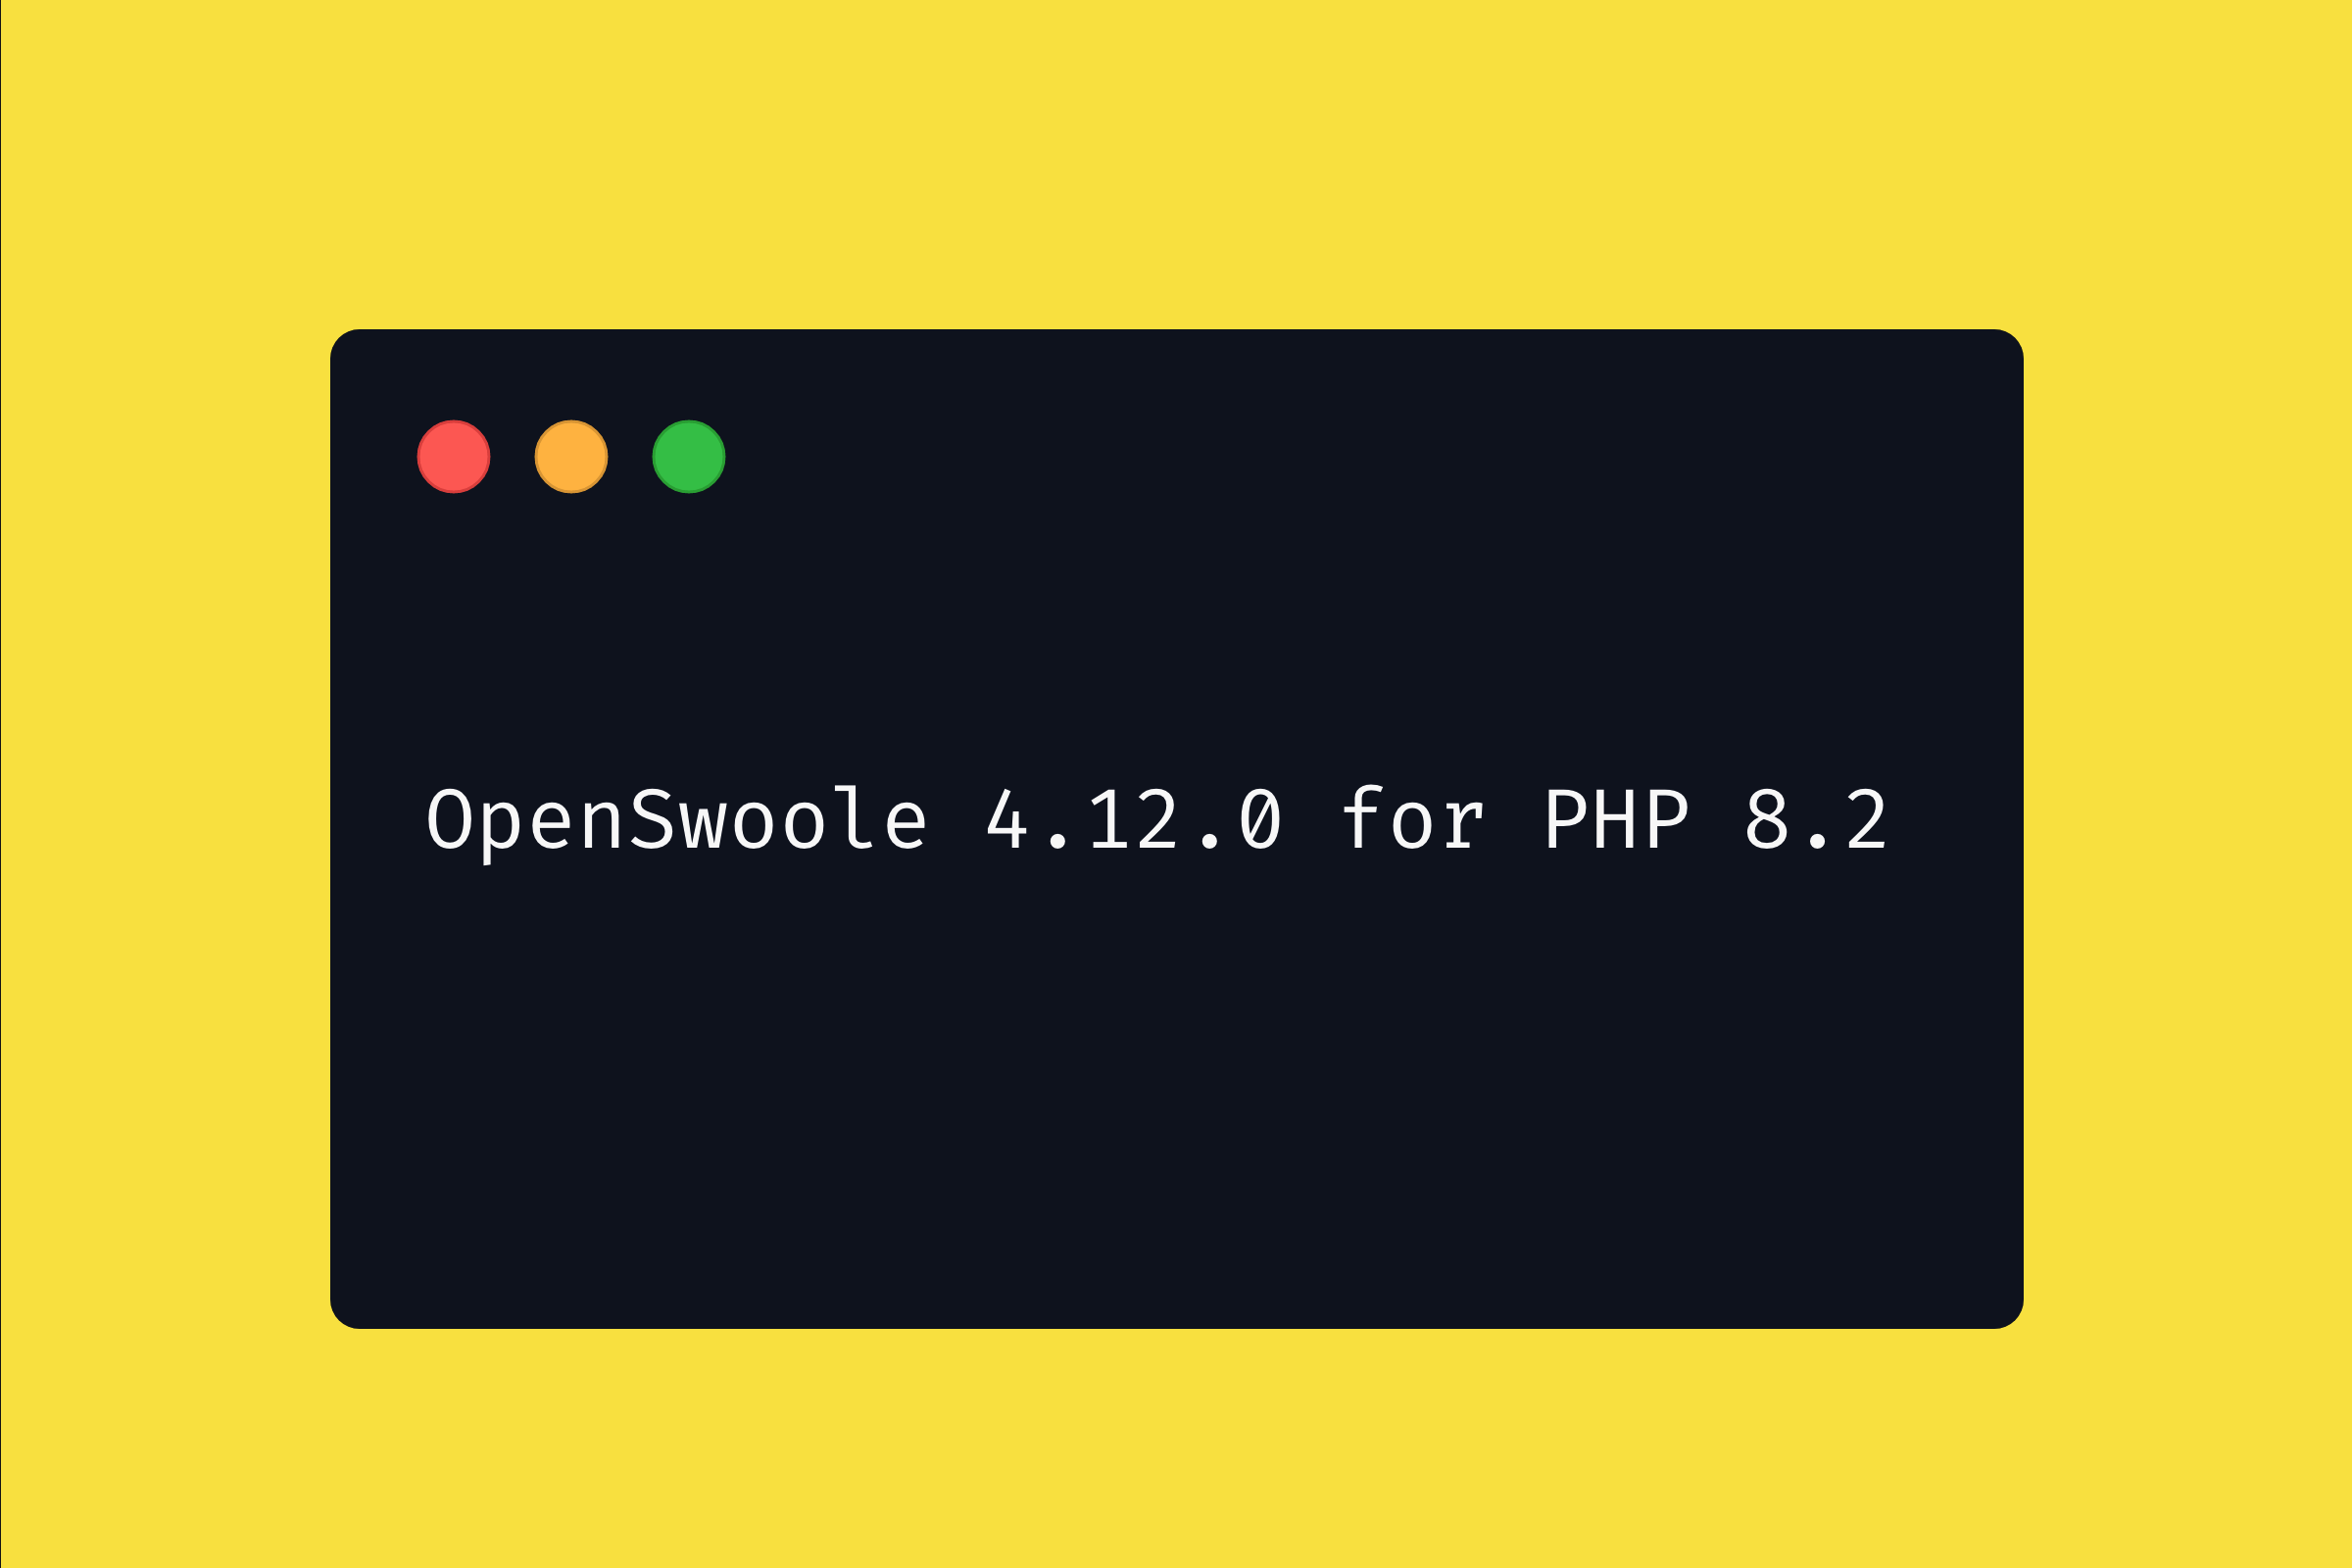 OpenSwoole 4.12.0 released with PHP 8.2 support and new features